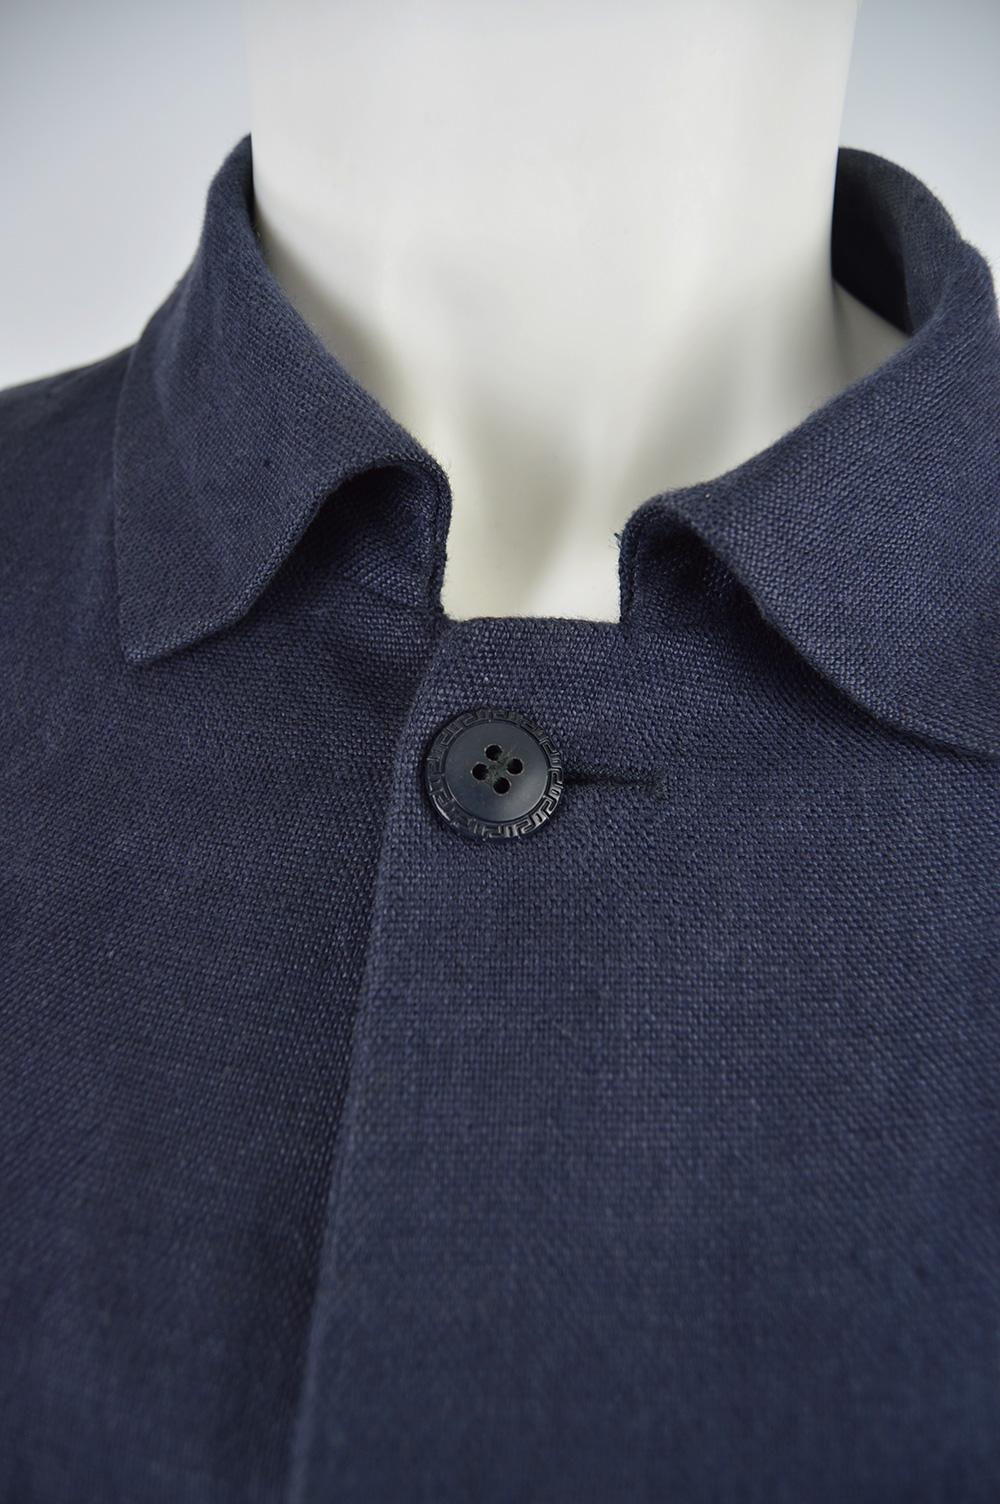 Gianni Versace Men's Vintage Dark Blue Linen Minimalist Chore Jacket In Good Condition In Doncaster, South Yorkshire